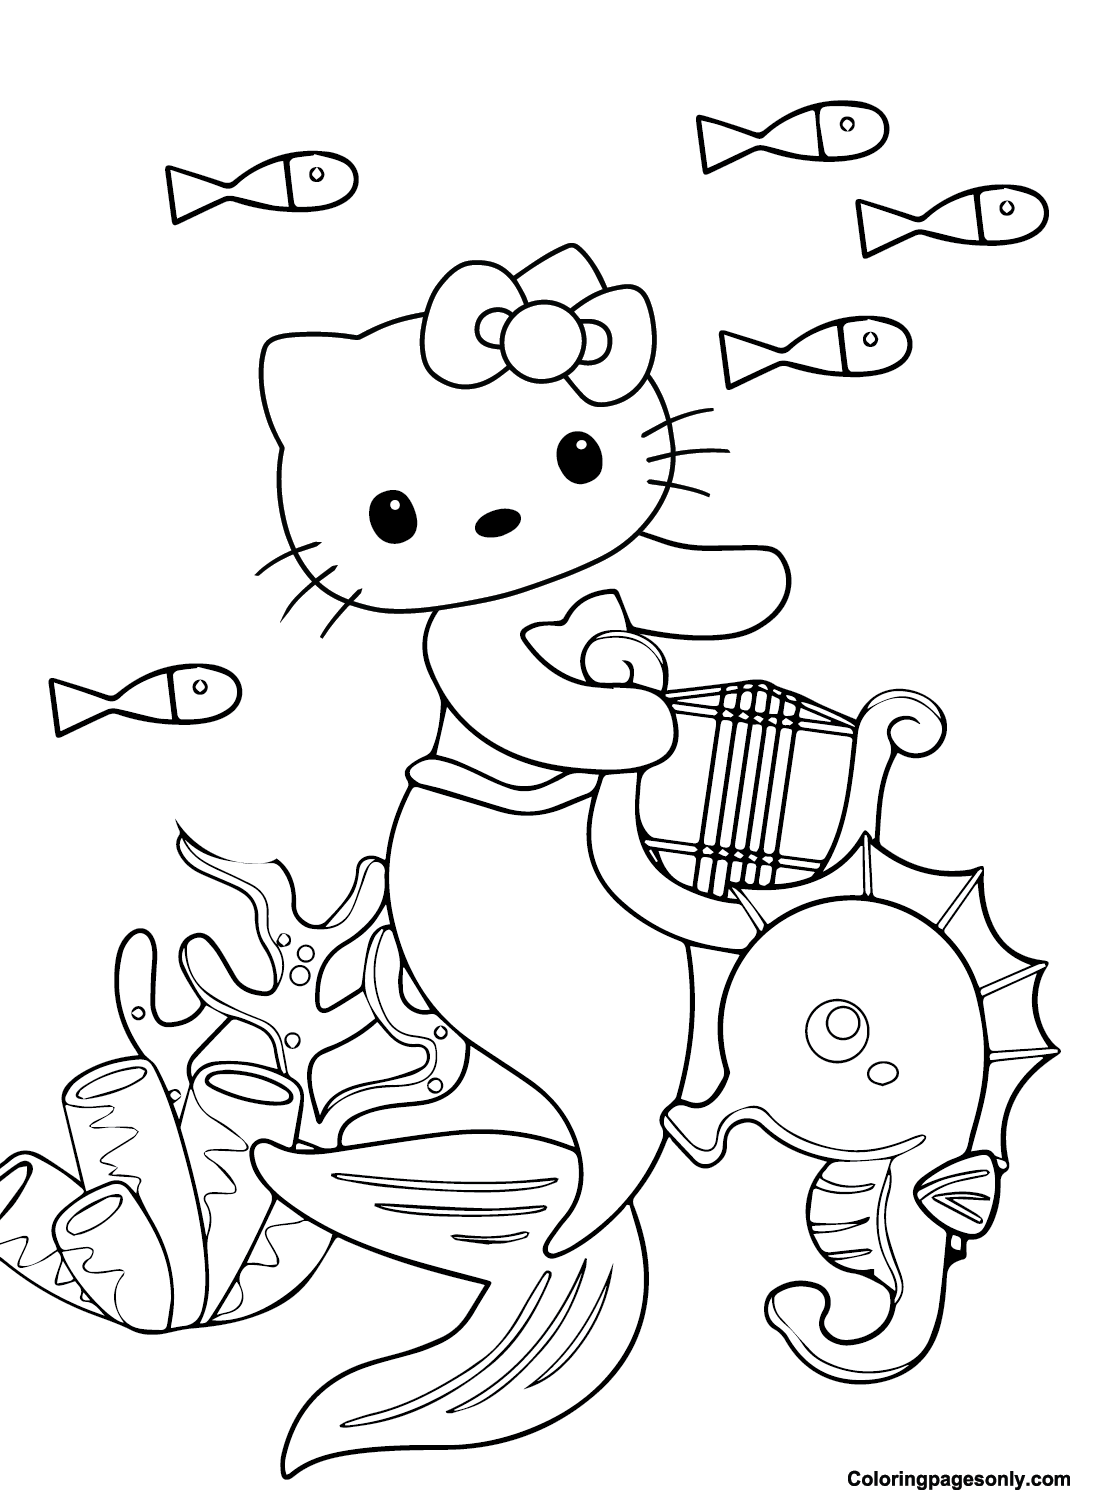 pictures-hello-kitty-mermaid-coloring-pages-hello-kitty-mermaid